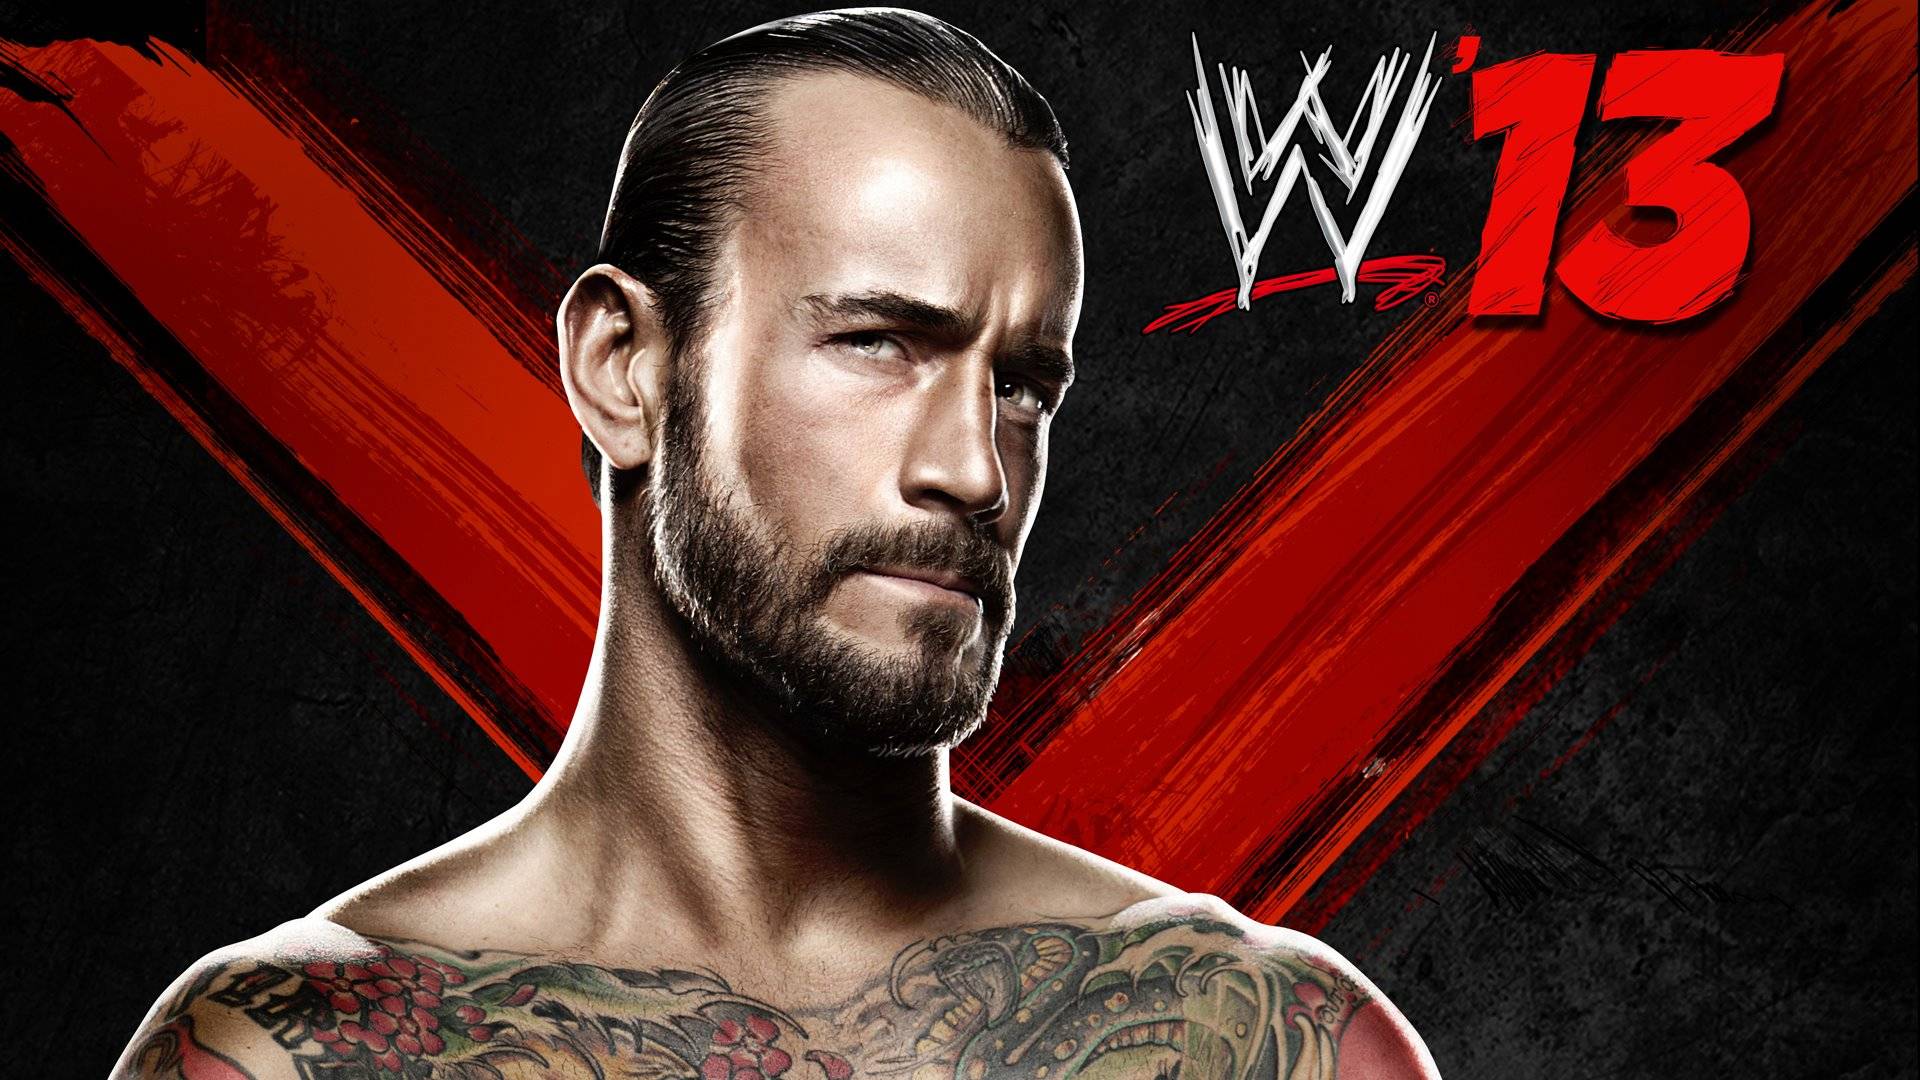 Wwe Wallpaper In HD Gamingbolt Video Game News Res